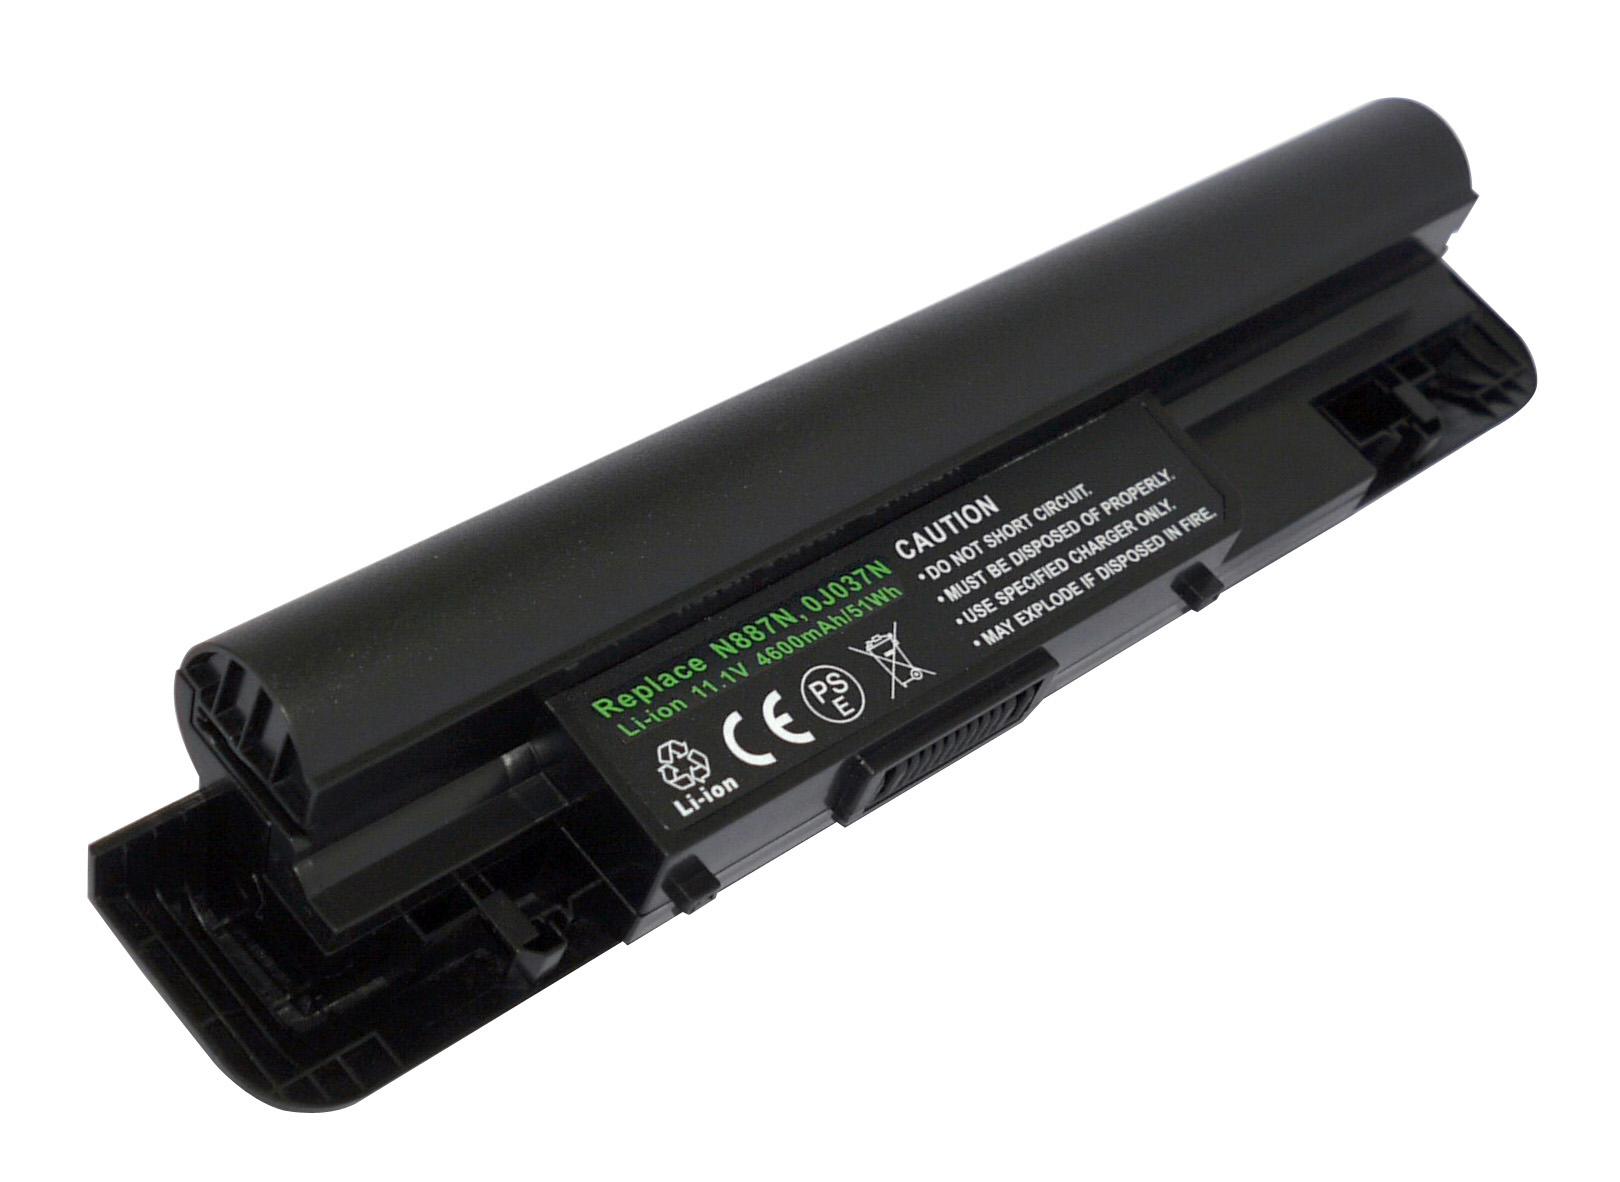 Dell 0f116n, 0j037n Laptop Batteries For Dell Vostro 1220 replacement